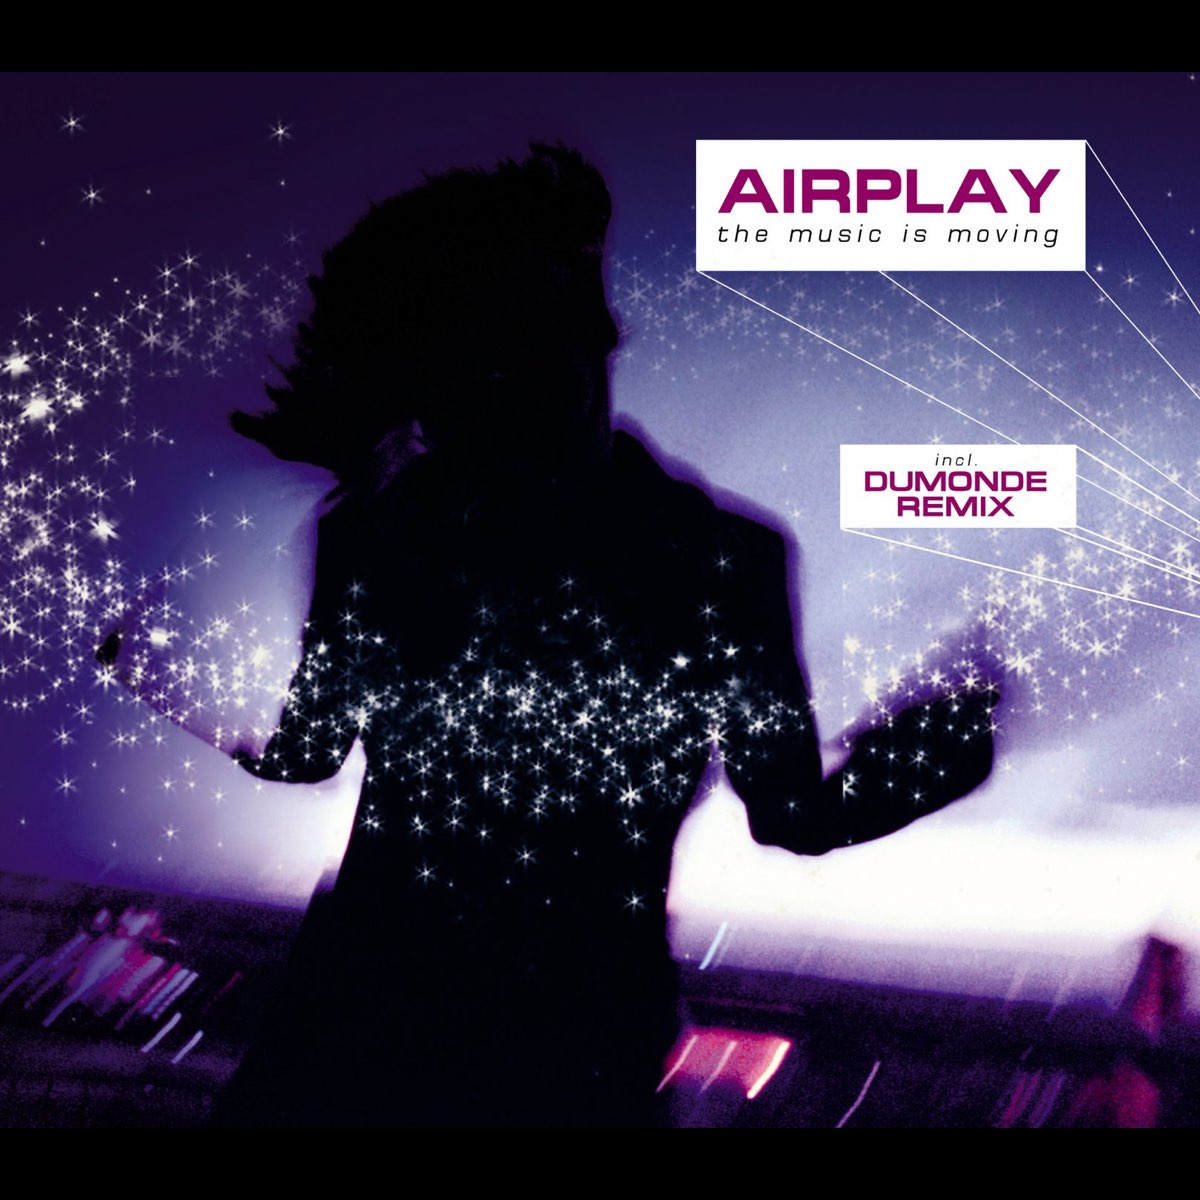 Песня music is. Airplay the Music is moving. Airplay - for your Love. Base Department - you Let me down (Airplay Edit) фото. The Music is New.